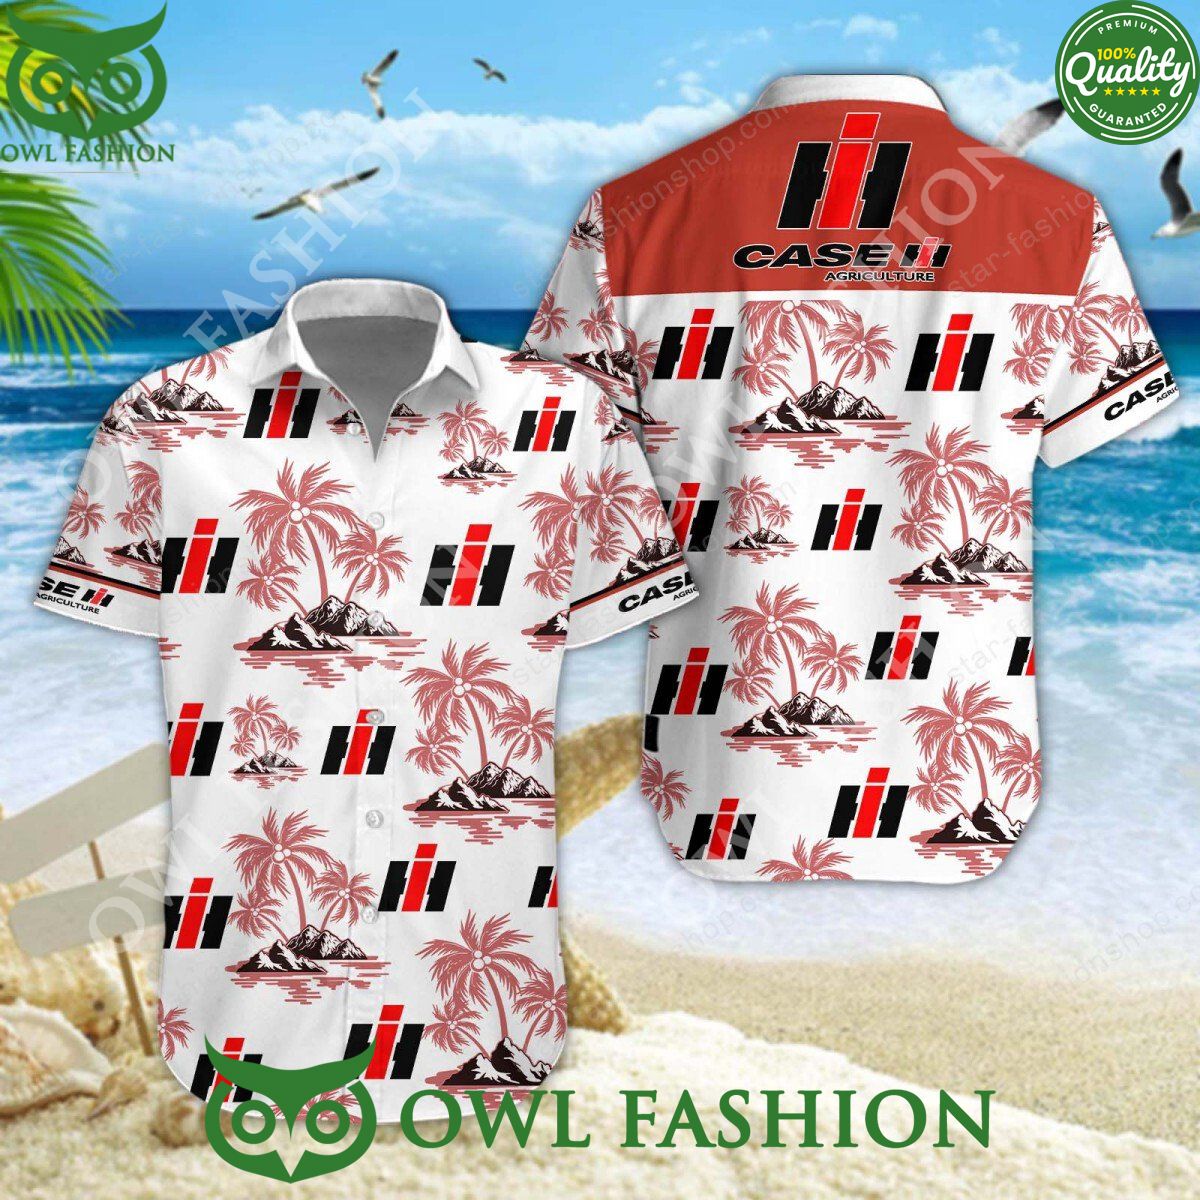 case ih american agricultural machinery manufacturer hawaiian shirt and short 1 5F7a1.jpg